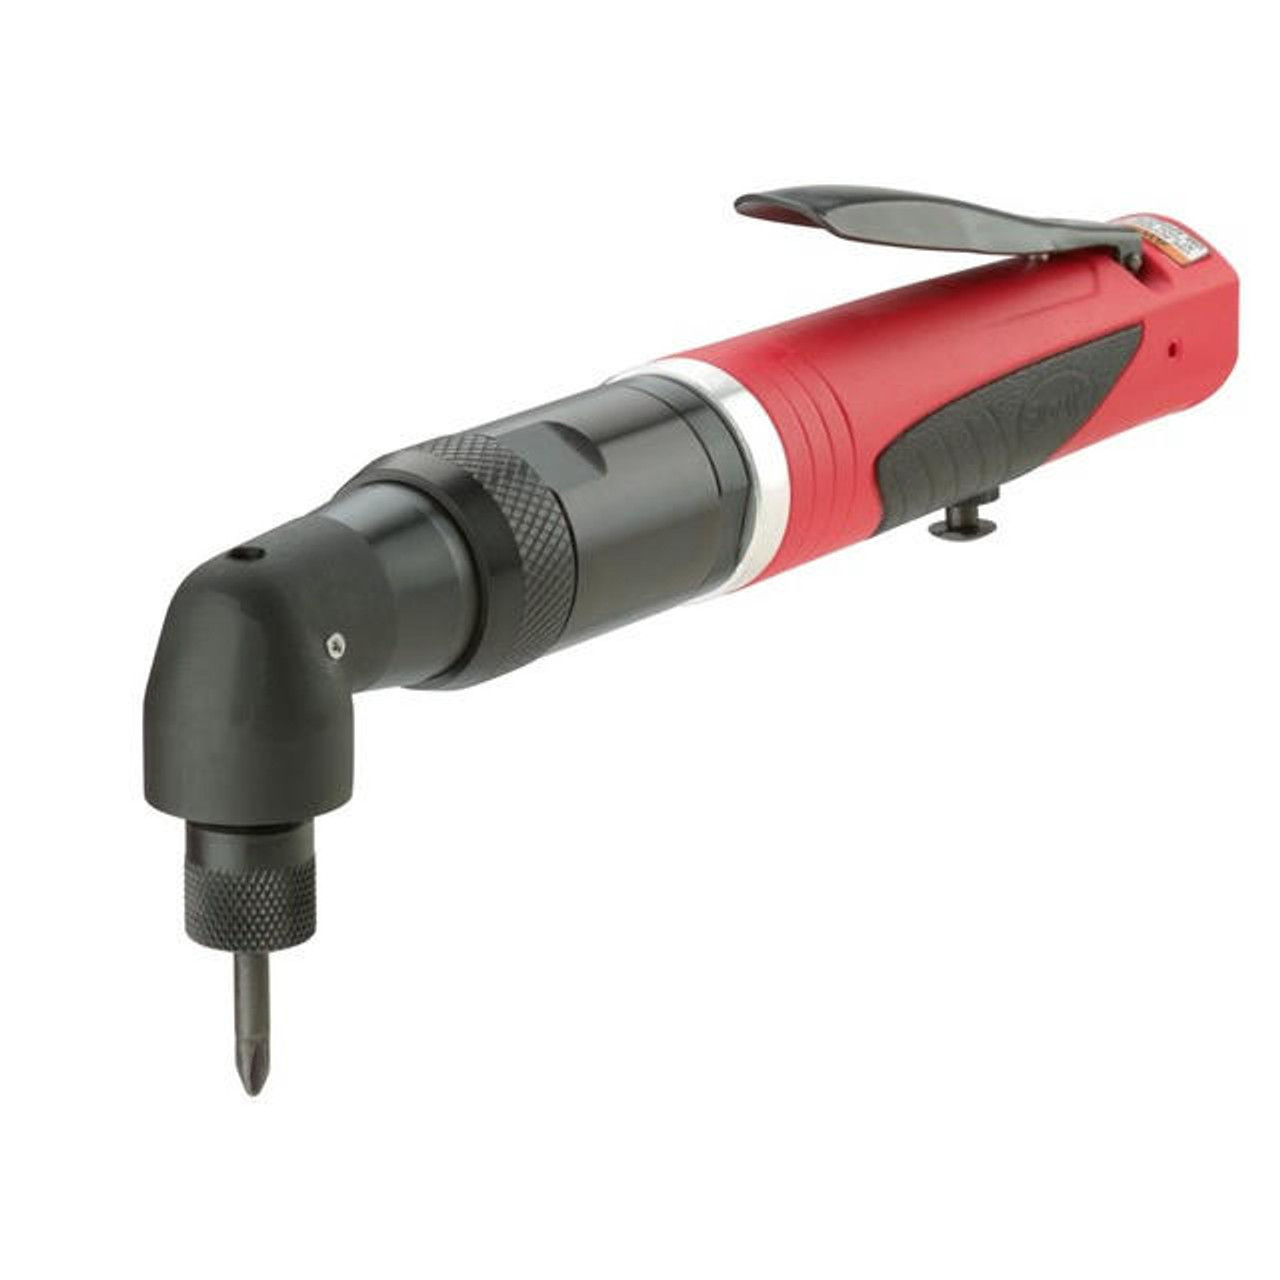  Sioux Tools SSD10A6S Stall Right Angle Screwdriver | 1/4" Quick Change | 600 RPM | 220 in.-lb. Max Torque 